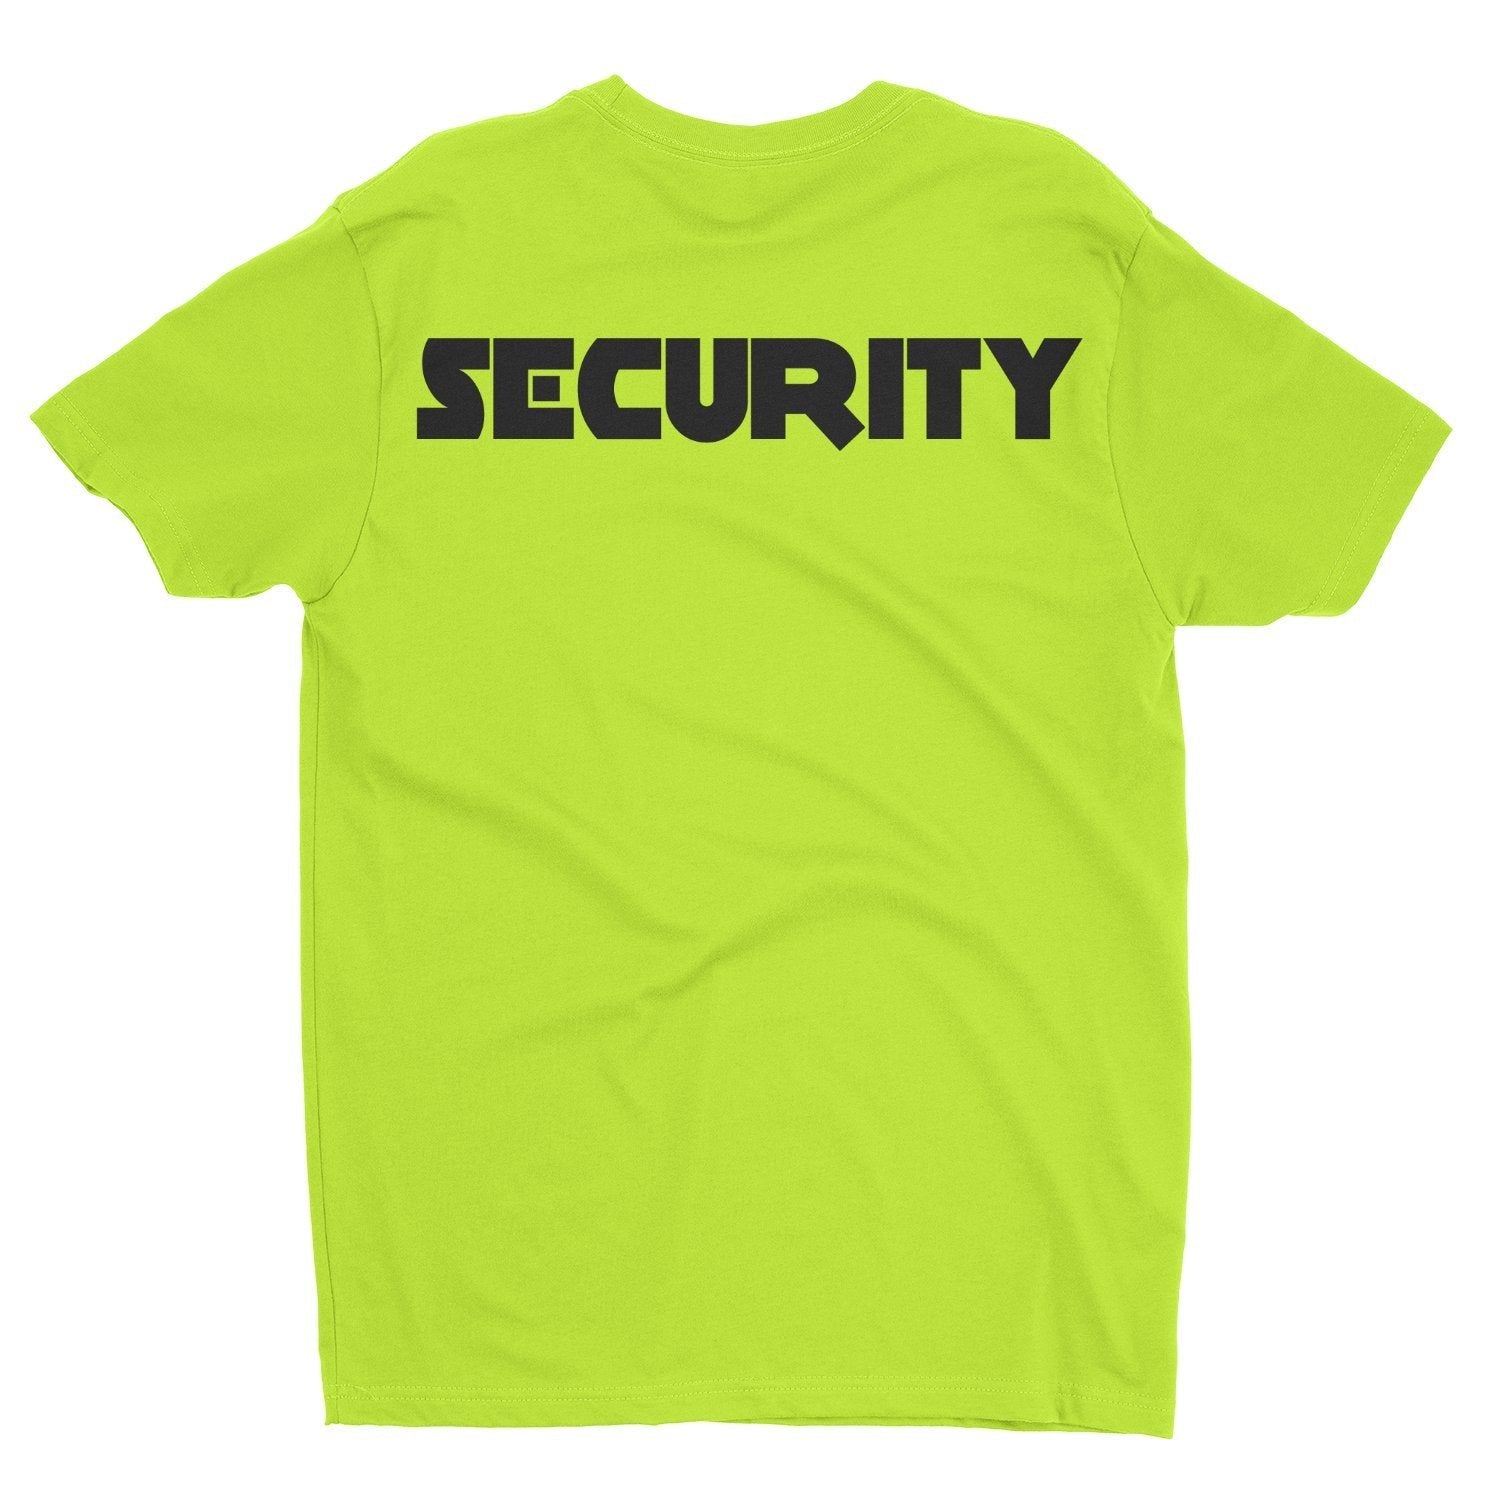 Men's Security T-Shirt Front & Back Screen Printed (Safety Green-Black)